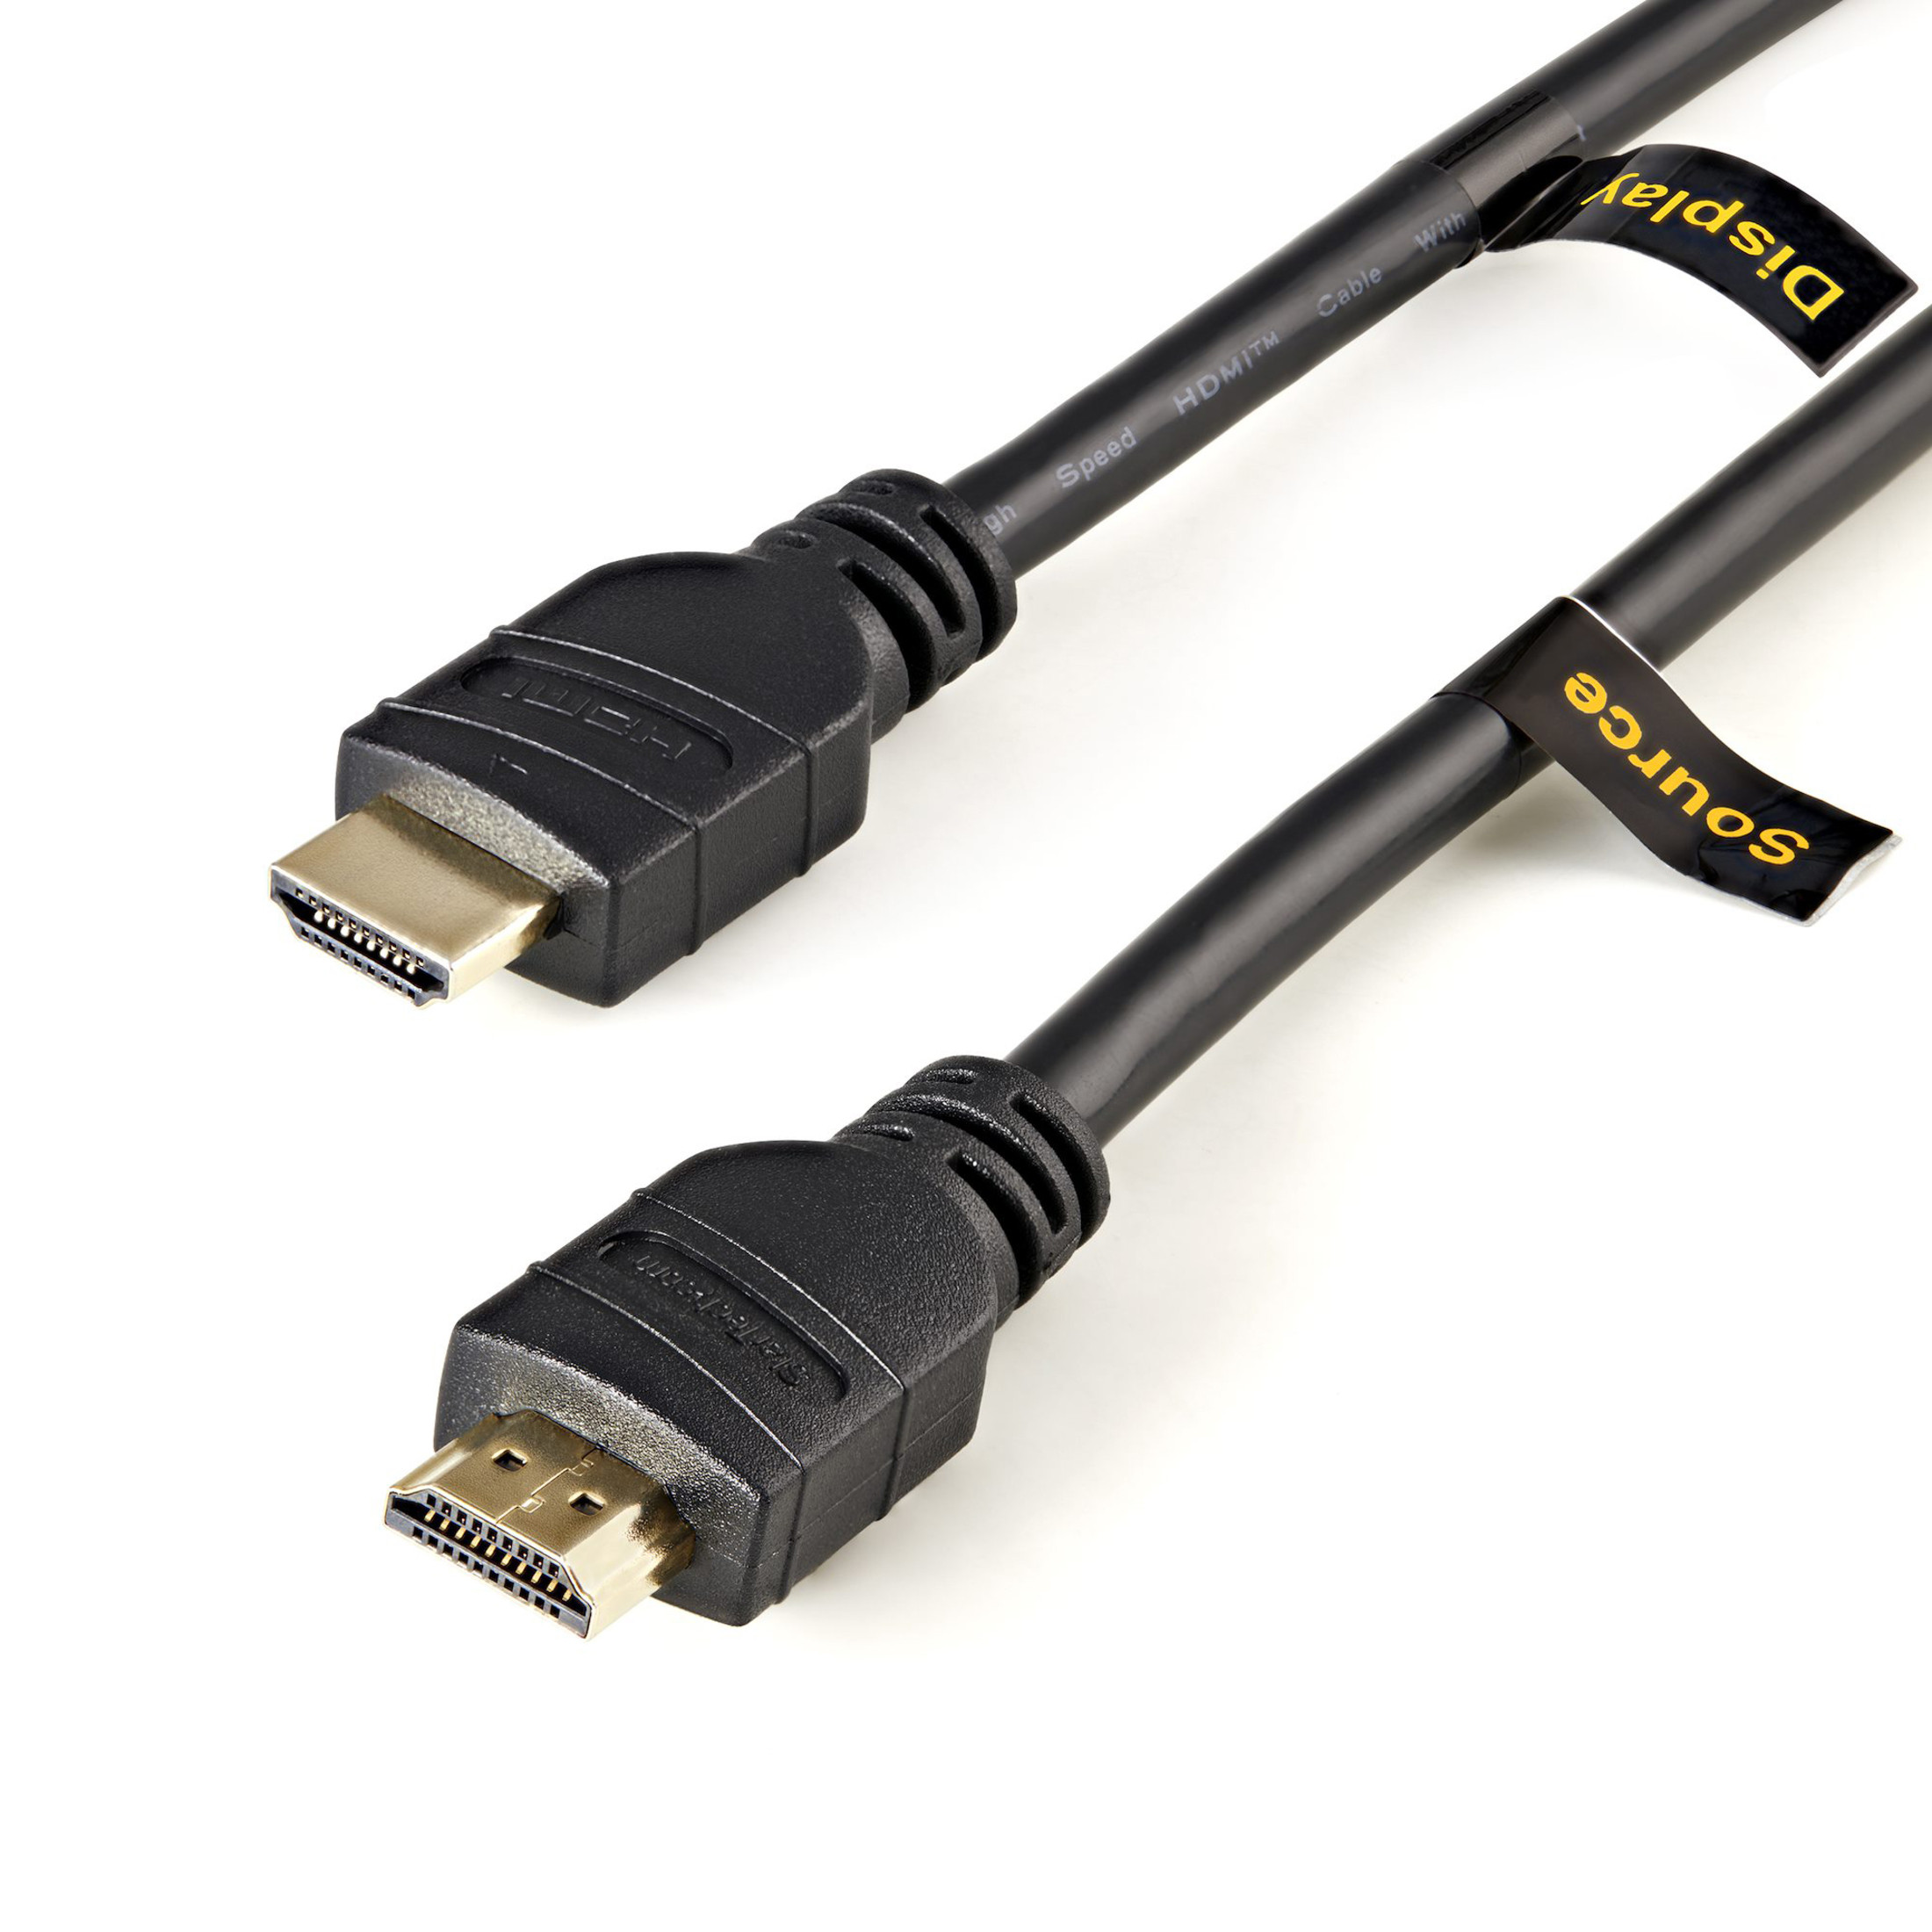 Startech .com 33ft (10m) HDMI Cable, 4K 30Hz UHD High Speed HDMI 1.4 Cable with Ethernet, CL2 Rated HDMI for In-Wall HDMM10MA - Corporate Armor